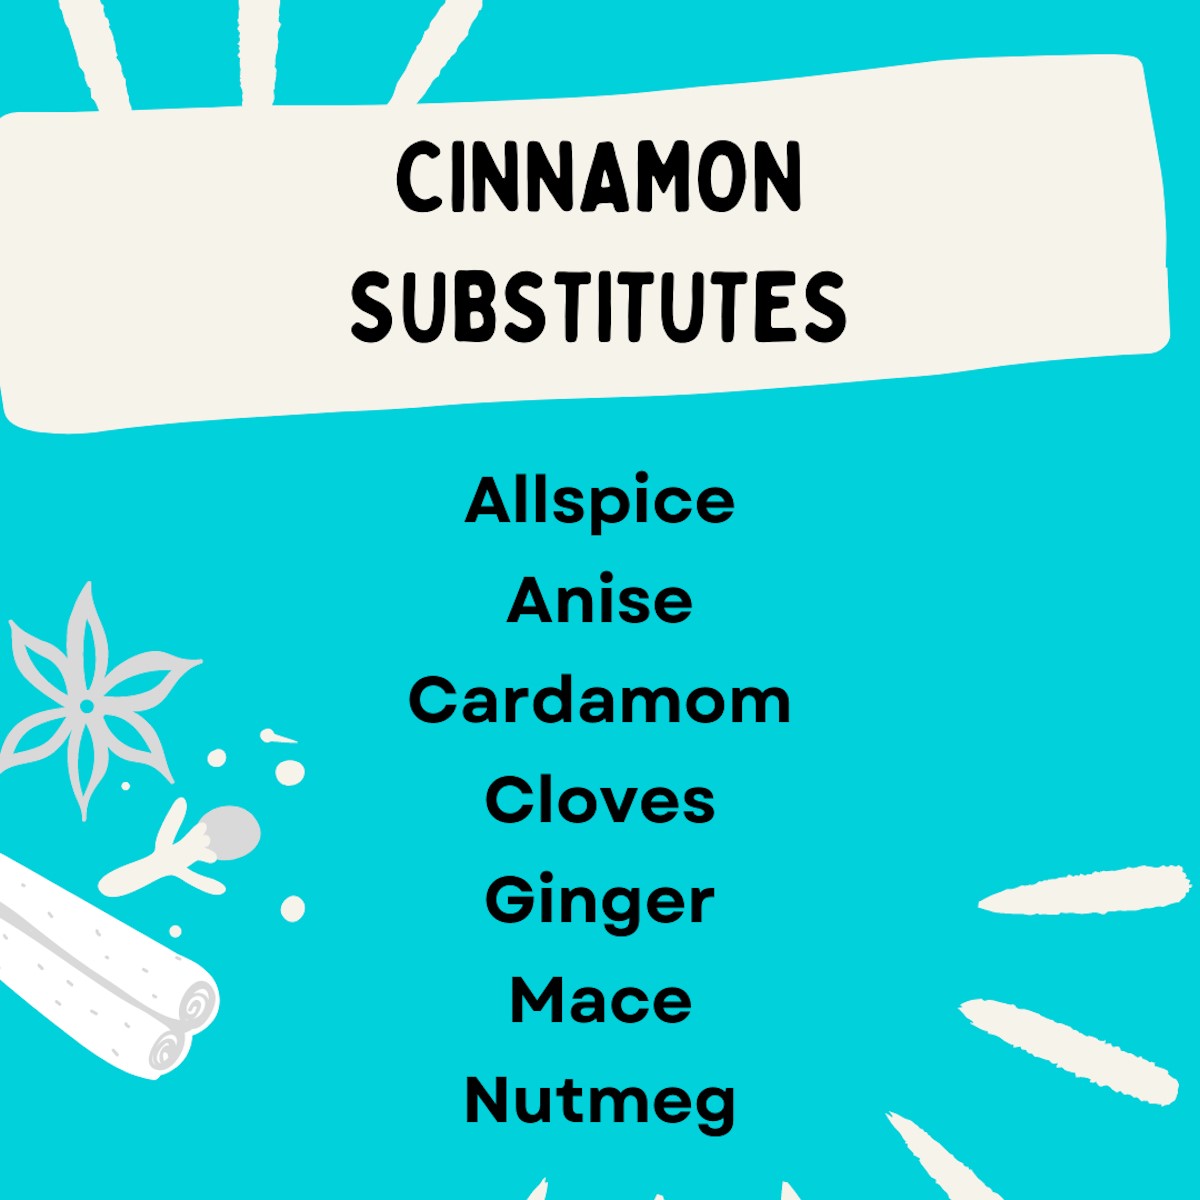 Cinnamon Substitutes infographic: Allspice, anise, cardamom, cloves, ginger, mace, and nutmeg are potential substitutes for cinnamon, especially with a cinnamon allergy.